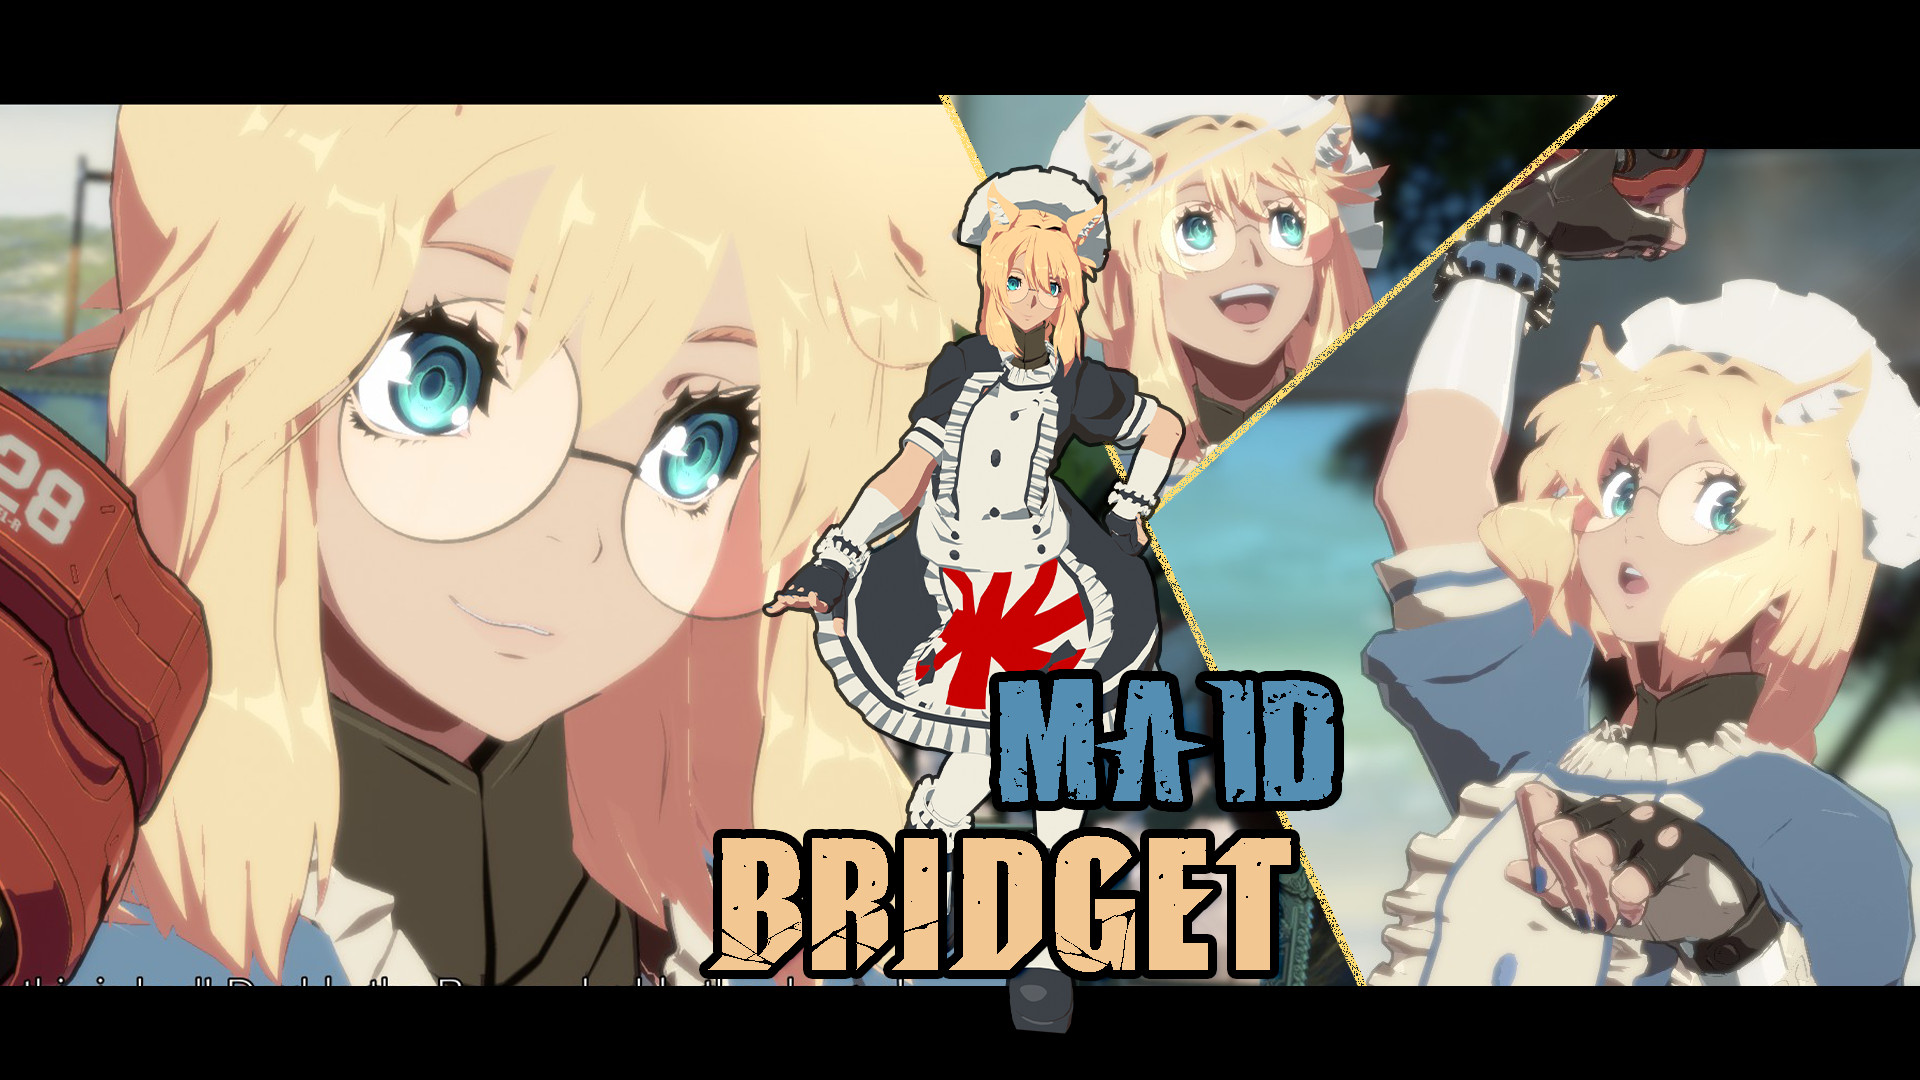 Guilty Gear Strive Bridget Outfit Will Appear in VRChat - Siliconera